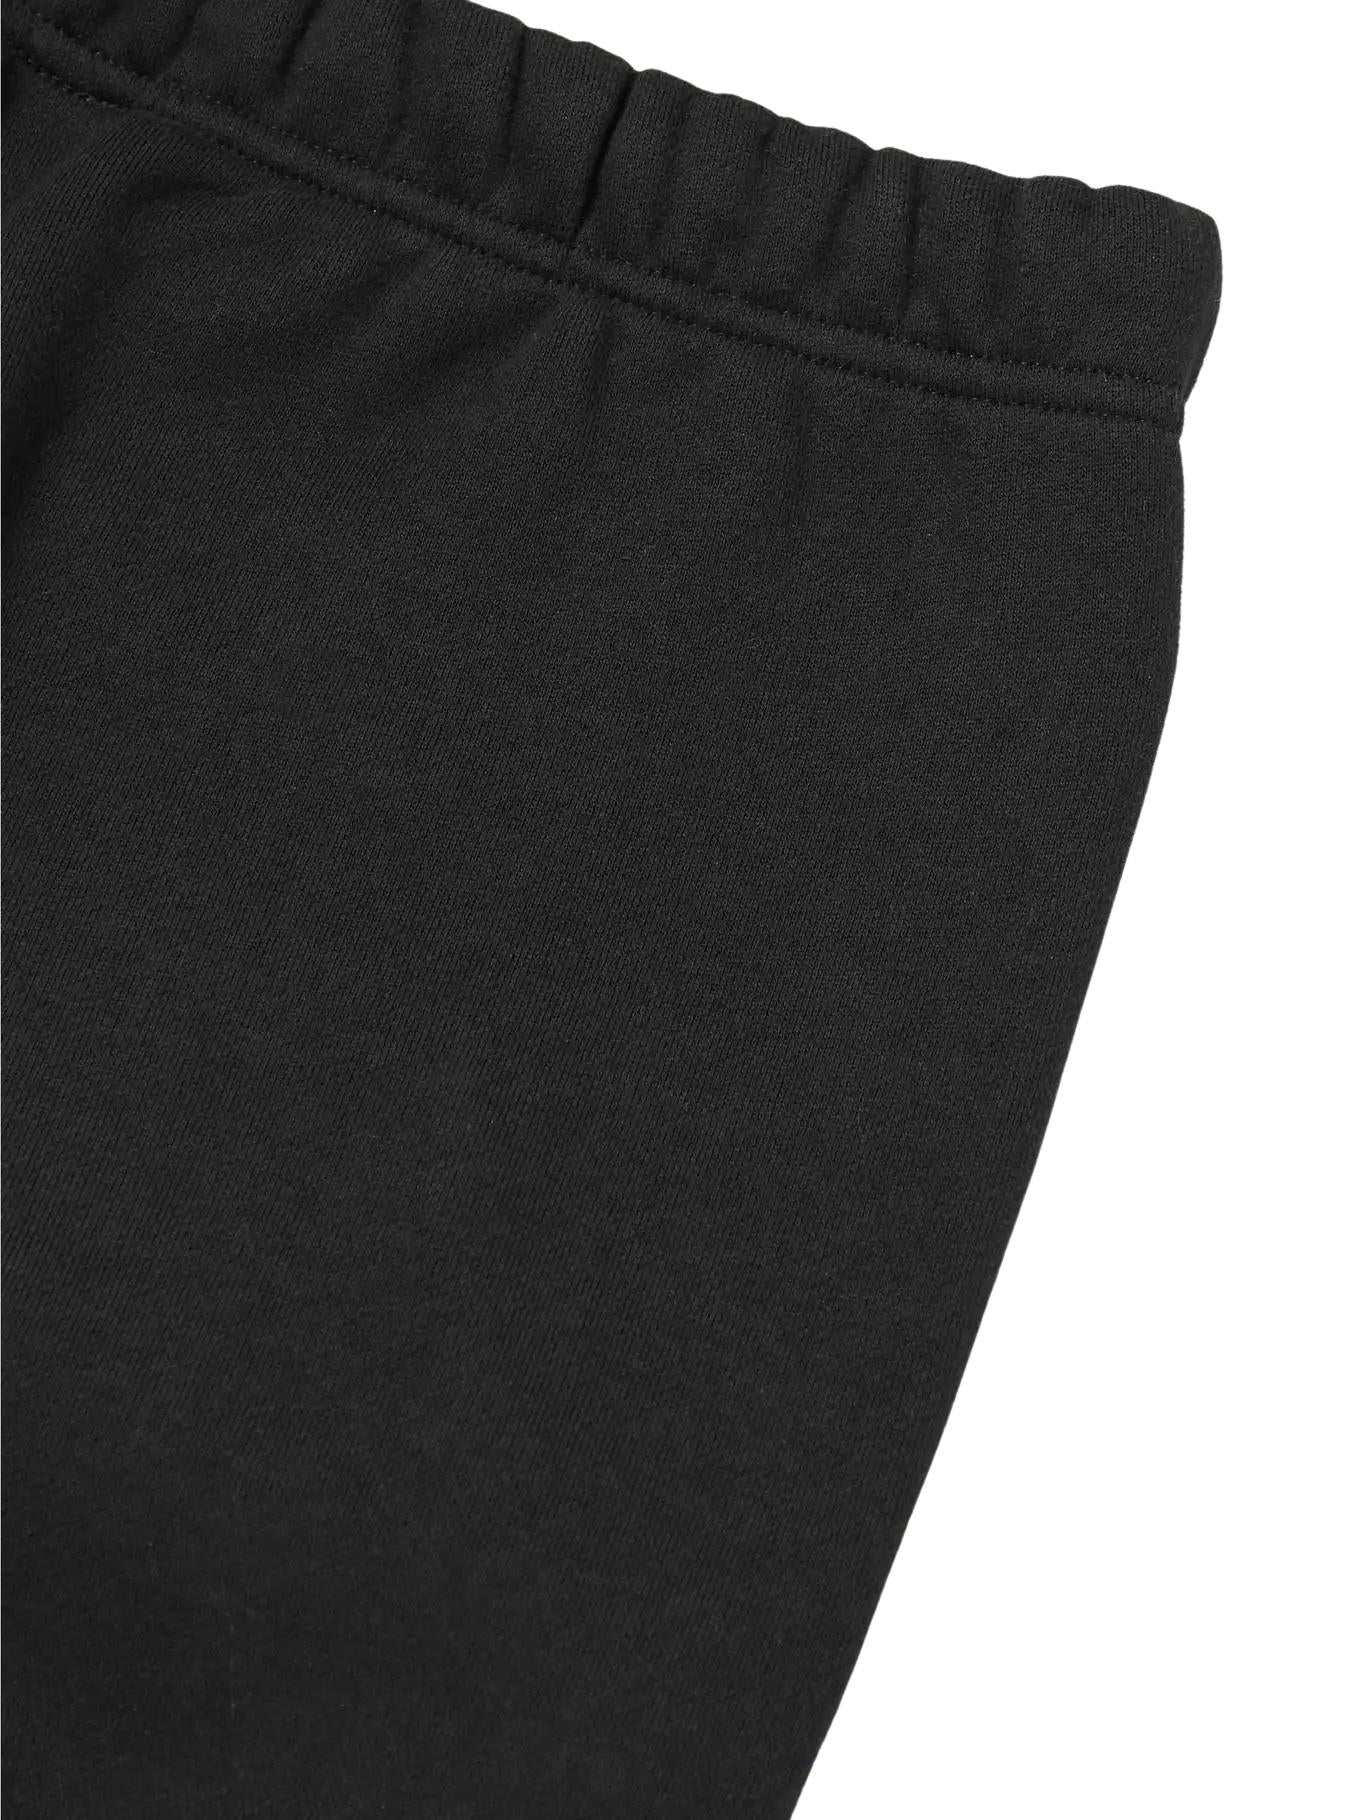 Fear of God ESSENTIALS - Black / Stretch Limo Sweatpants (SS22) | Hype ...